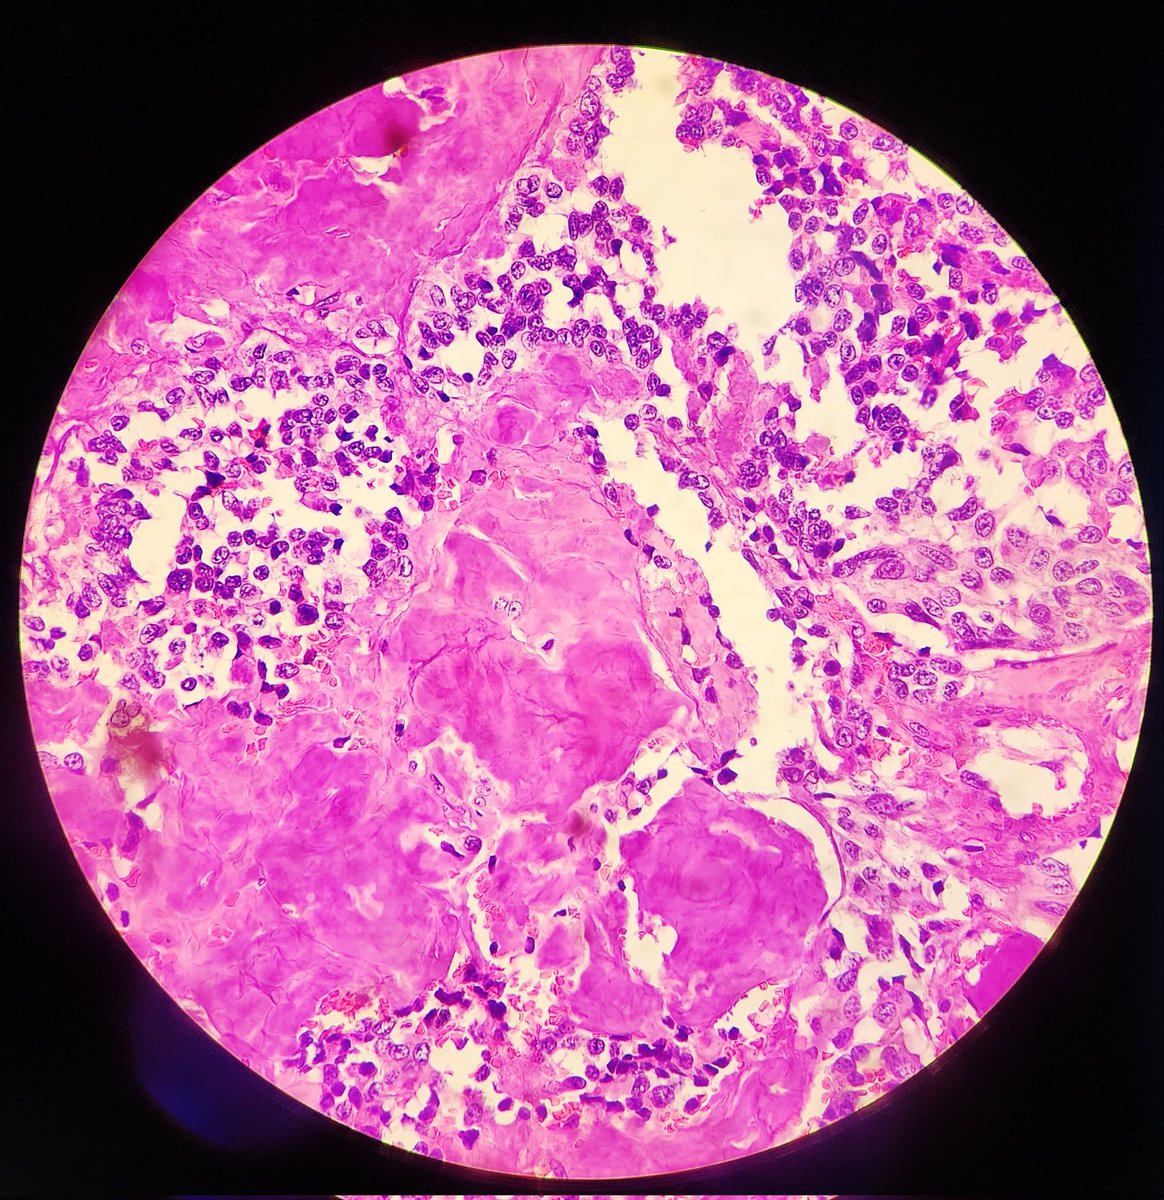 #Histopathology 
#metastasis
#lymph node
#photomicrograph
#PathTwitter 
50-yr. M
Specimen : Cervical lymph node ( biopsy).
Dx: Compatible with metastatic medullary thyroid carcinoma. 
Immuno recommended.